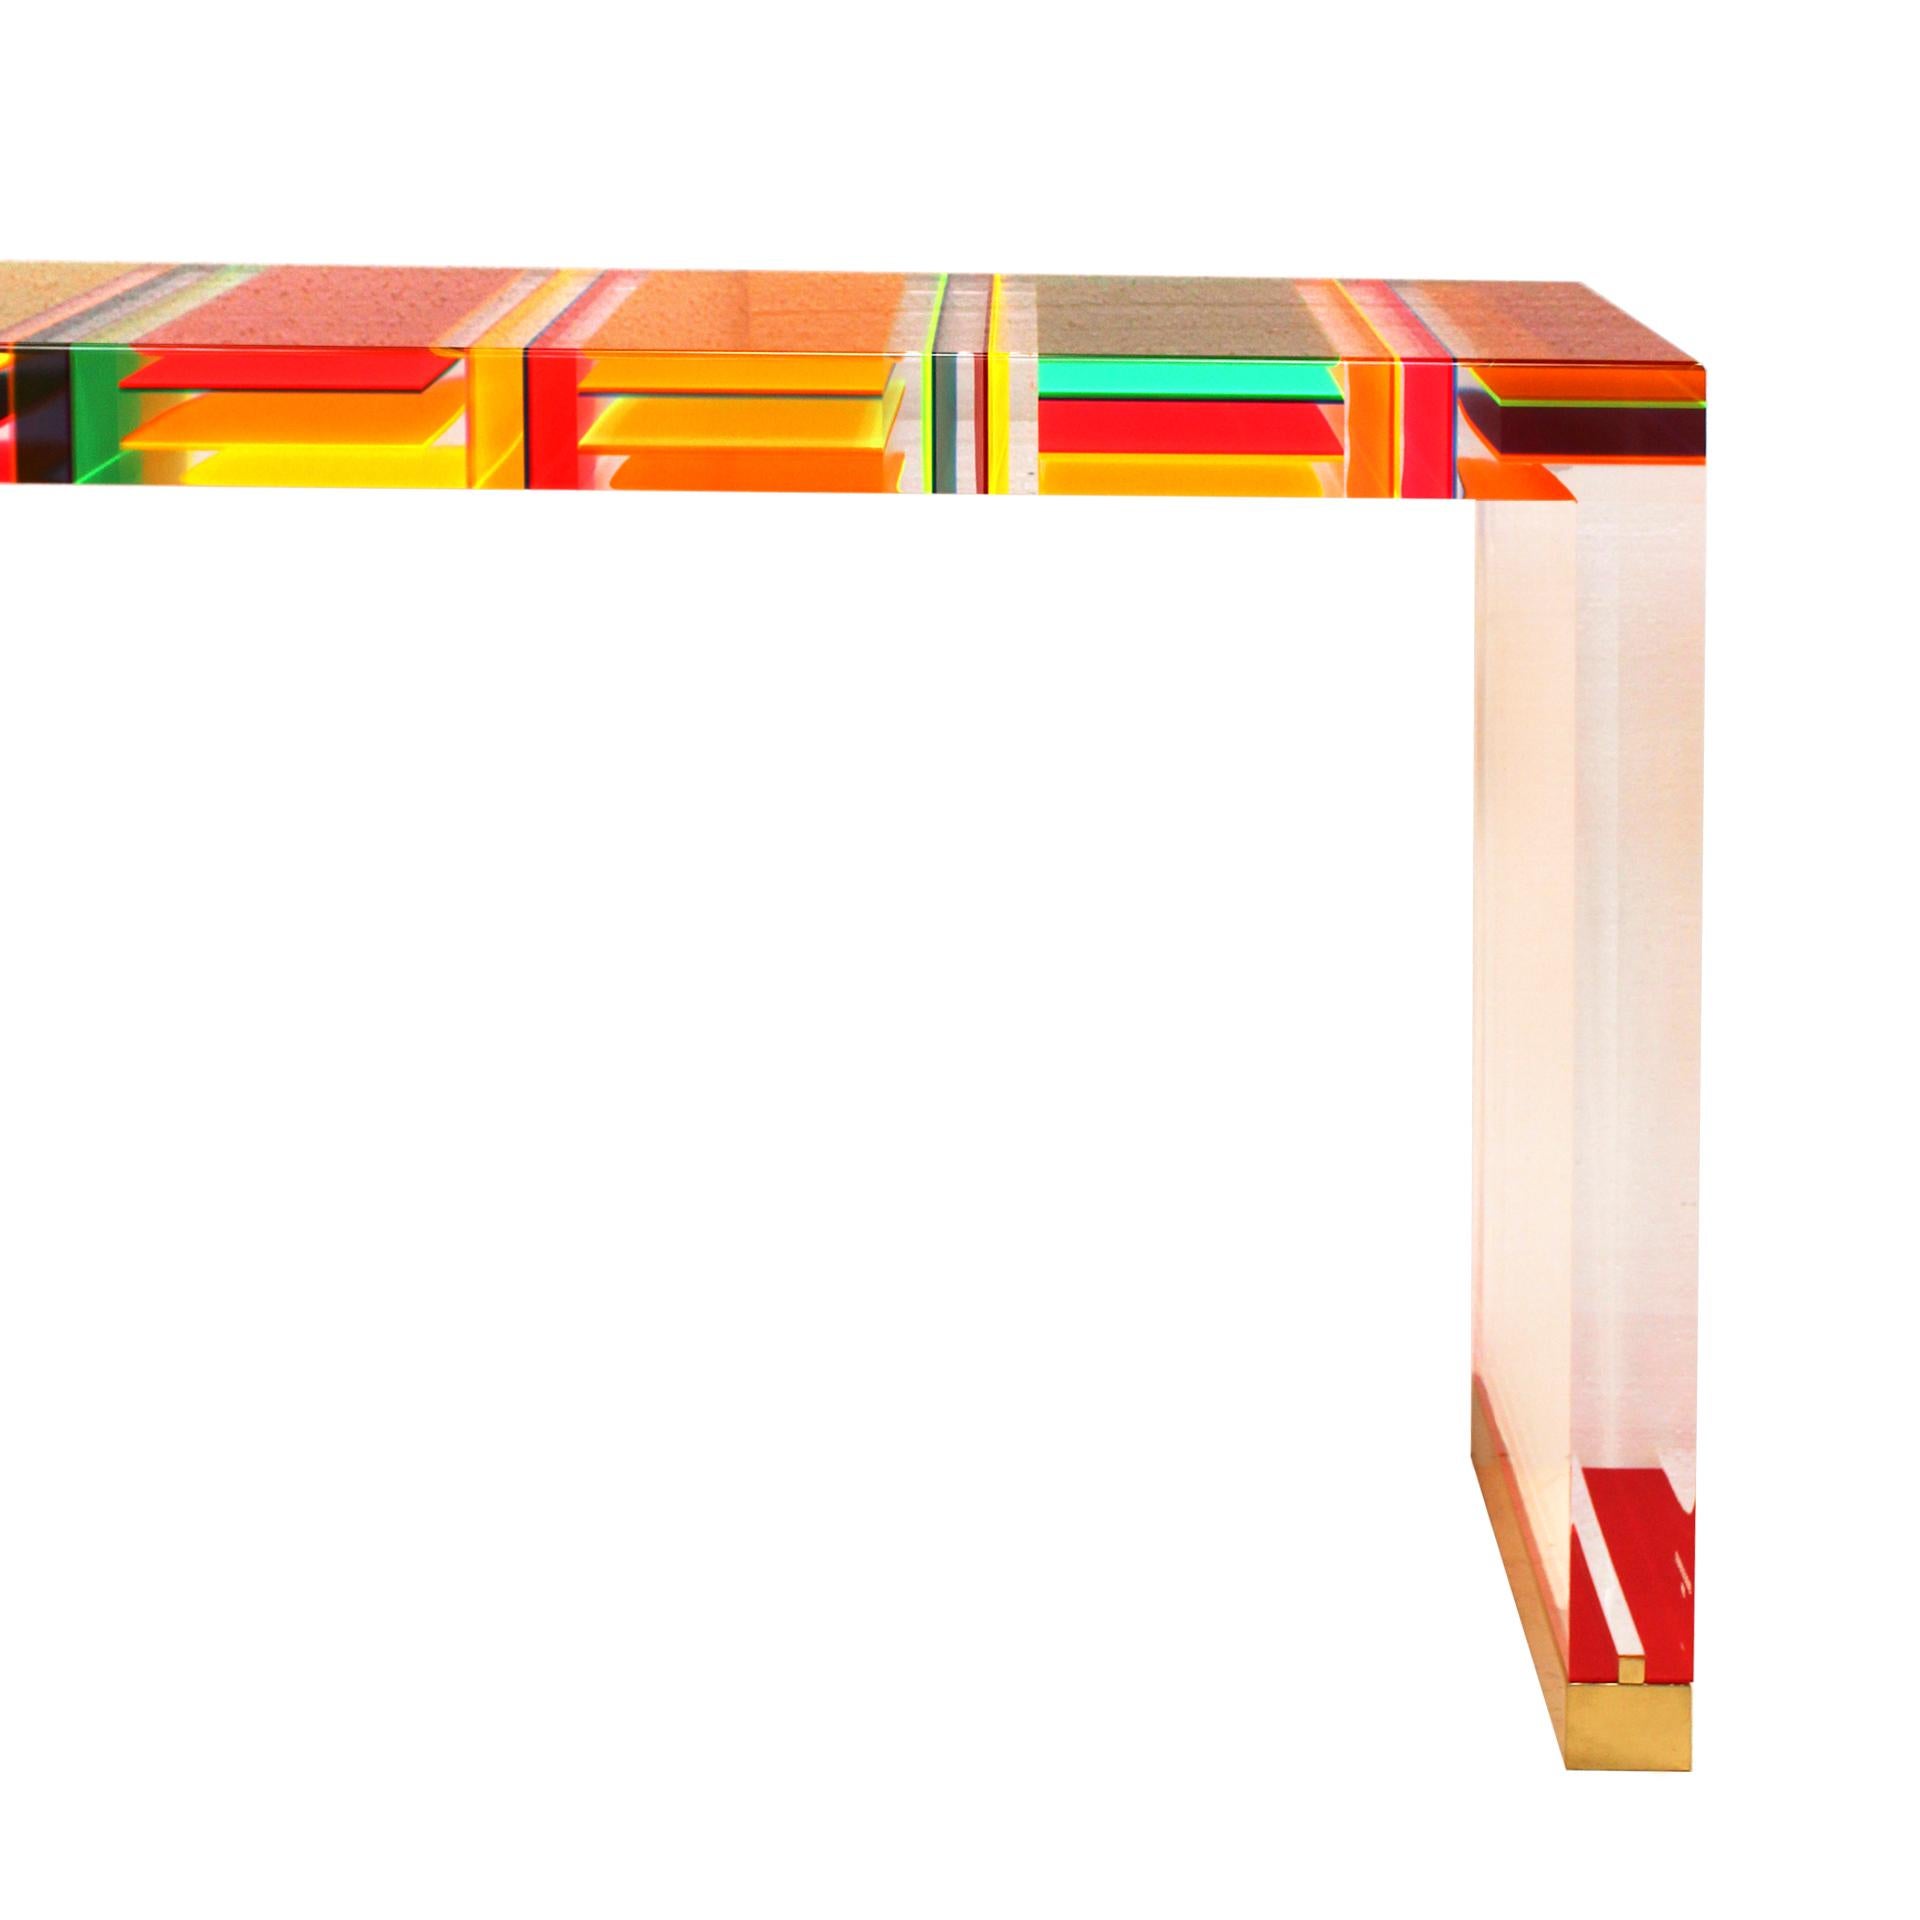 Rectangular console table designed by Milanese Studio Superego, made in multi-color and transparent plexiglass with eight centimetres thickness and feet of the legs finished in brass.

Every item LA Studio offers is checked by our team of 10